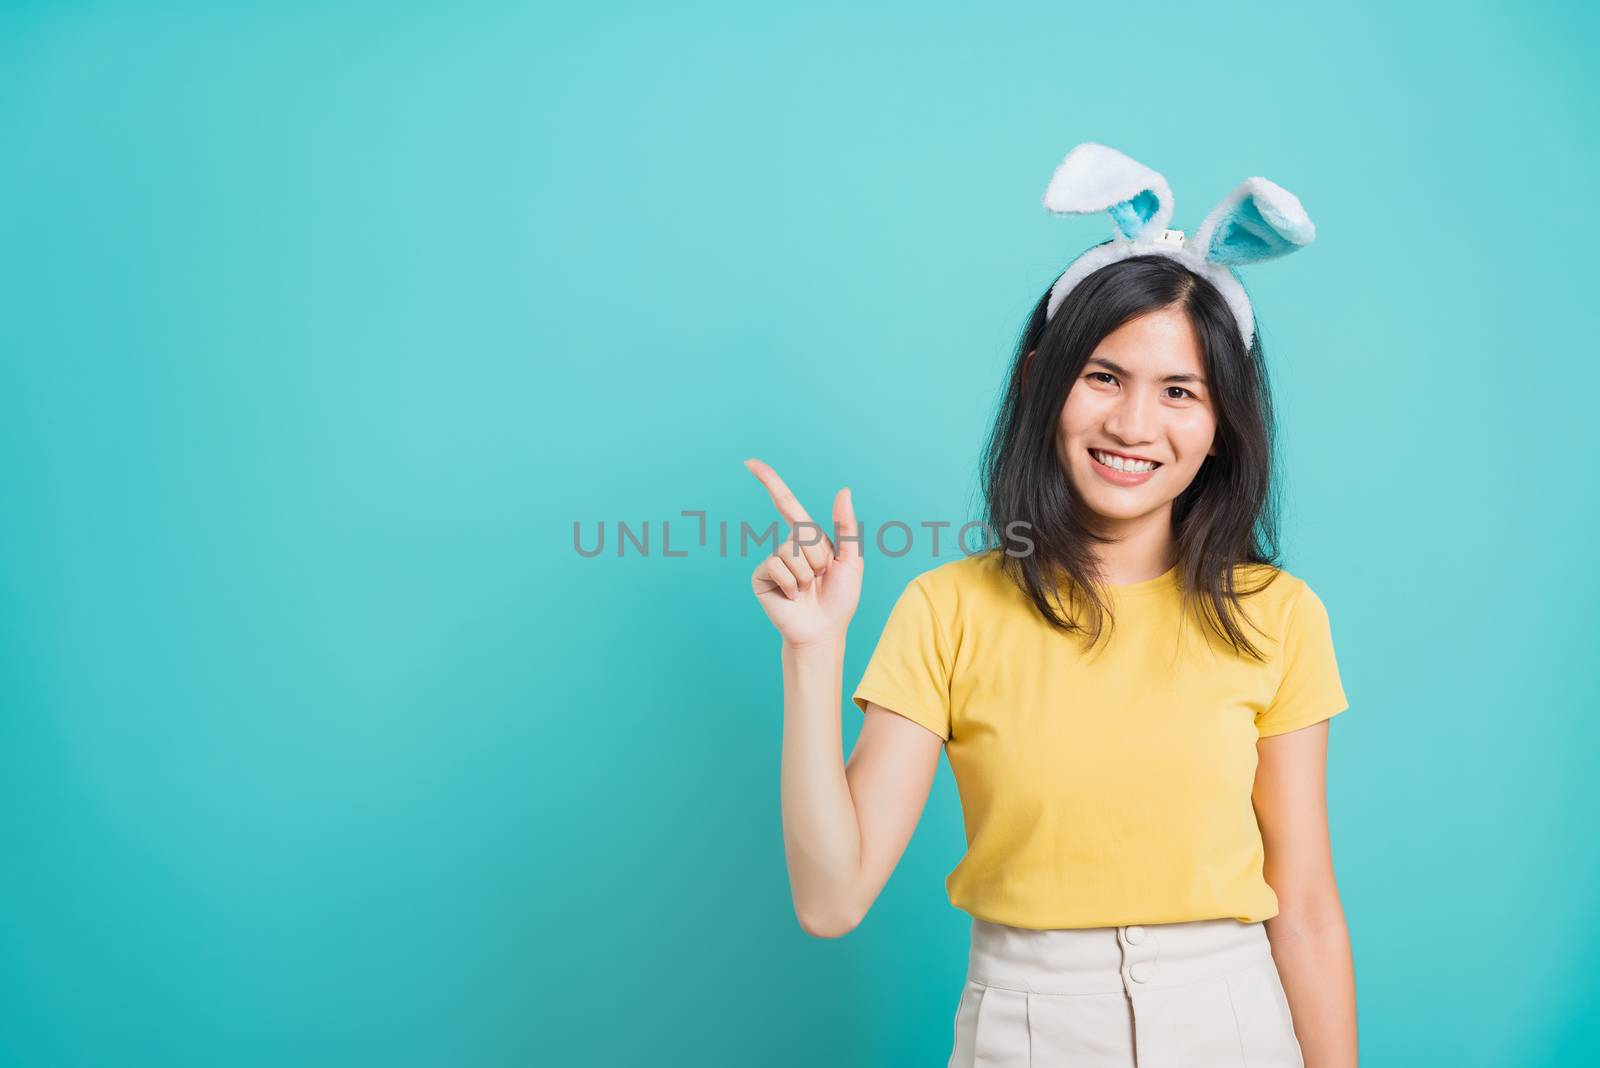 Portrait Asian beautiful happy young woman smile white teeth wear yellow t-shirt standing with bunny ears pointing to space her looking camera, on blue background with copy space